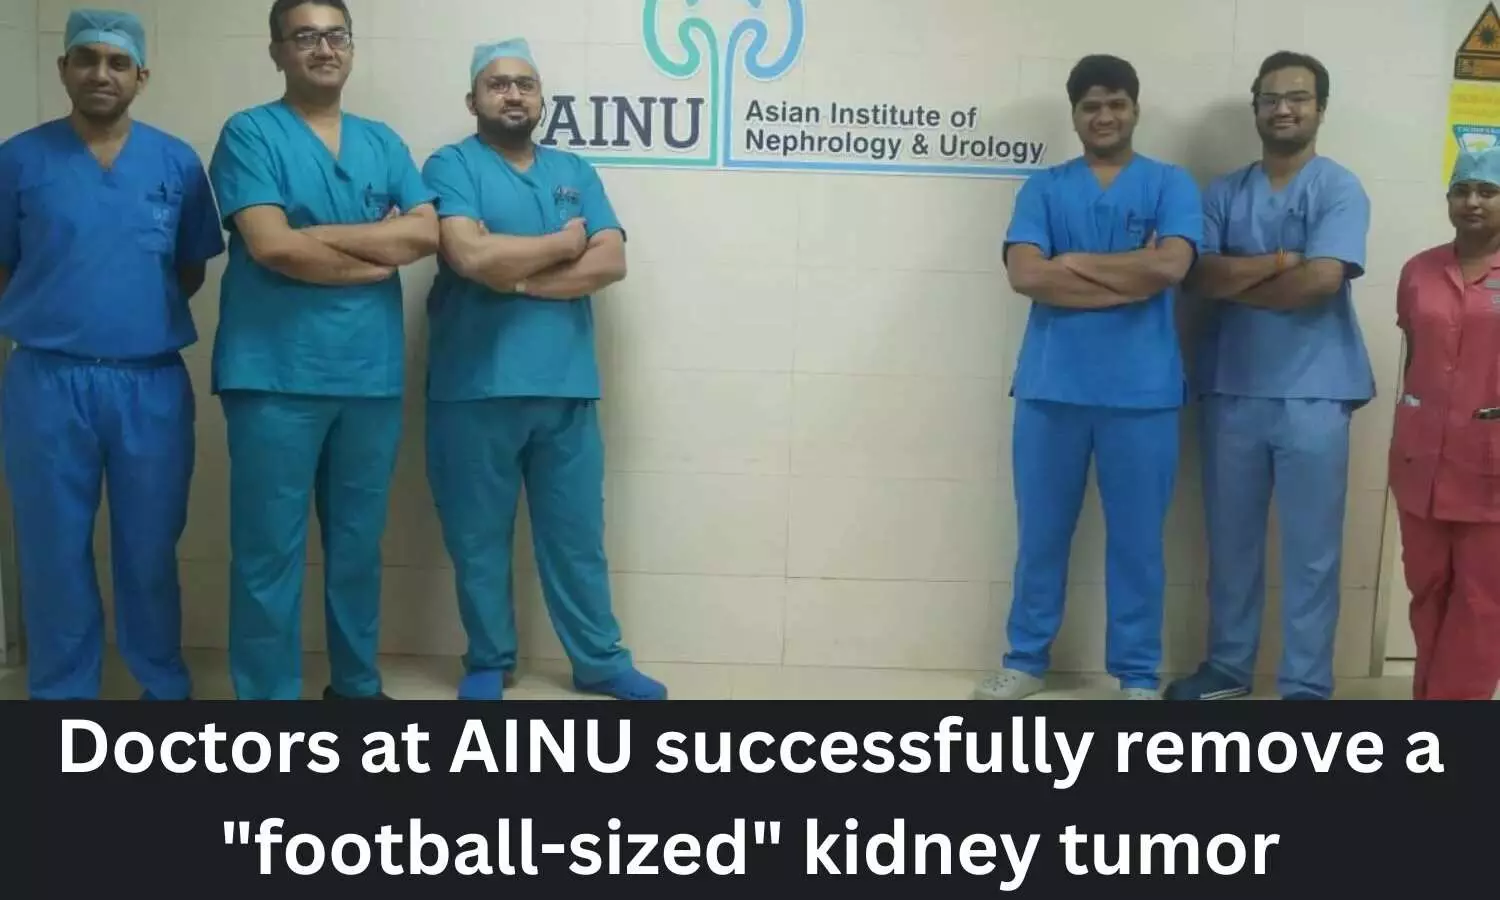 Doctors at AINU remove football-sized kidney tumor